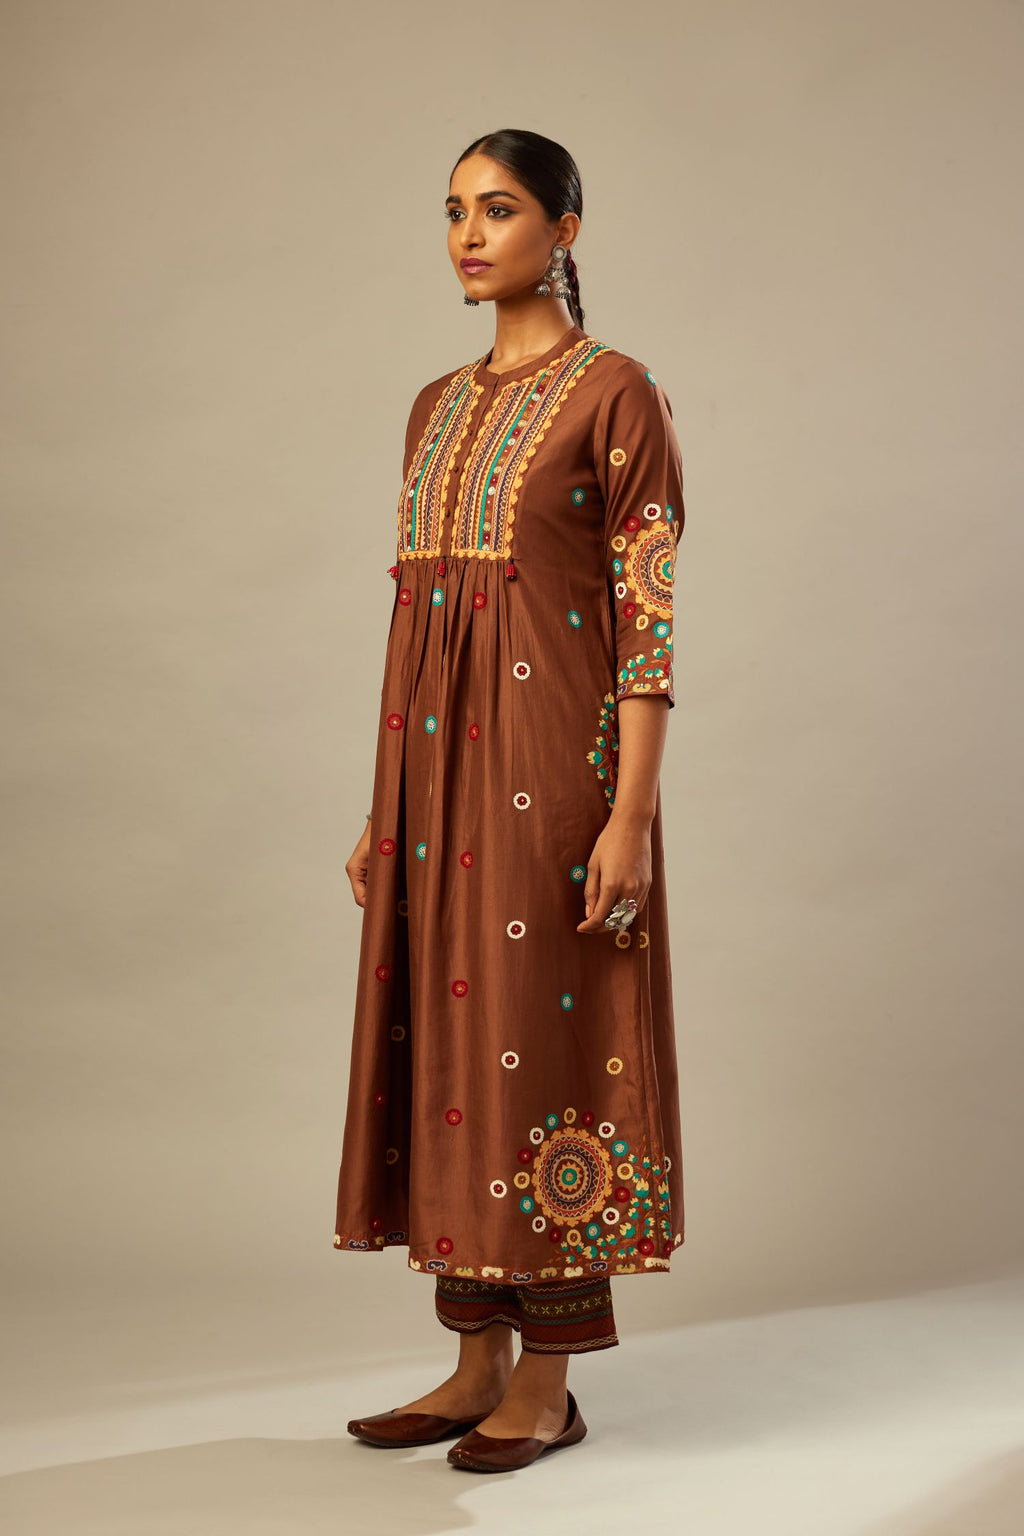 Brown silk gathered kurta-dress set with appliqué stripes along with aari threadwork flowers and floral trellises along with a circular appliqued motif.